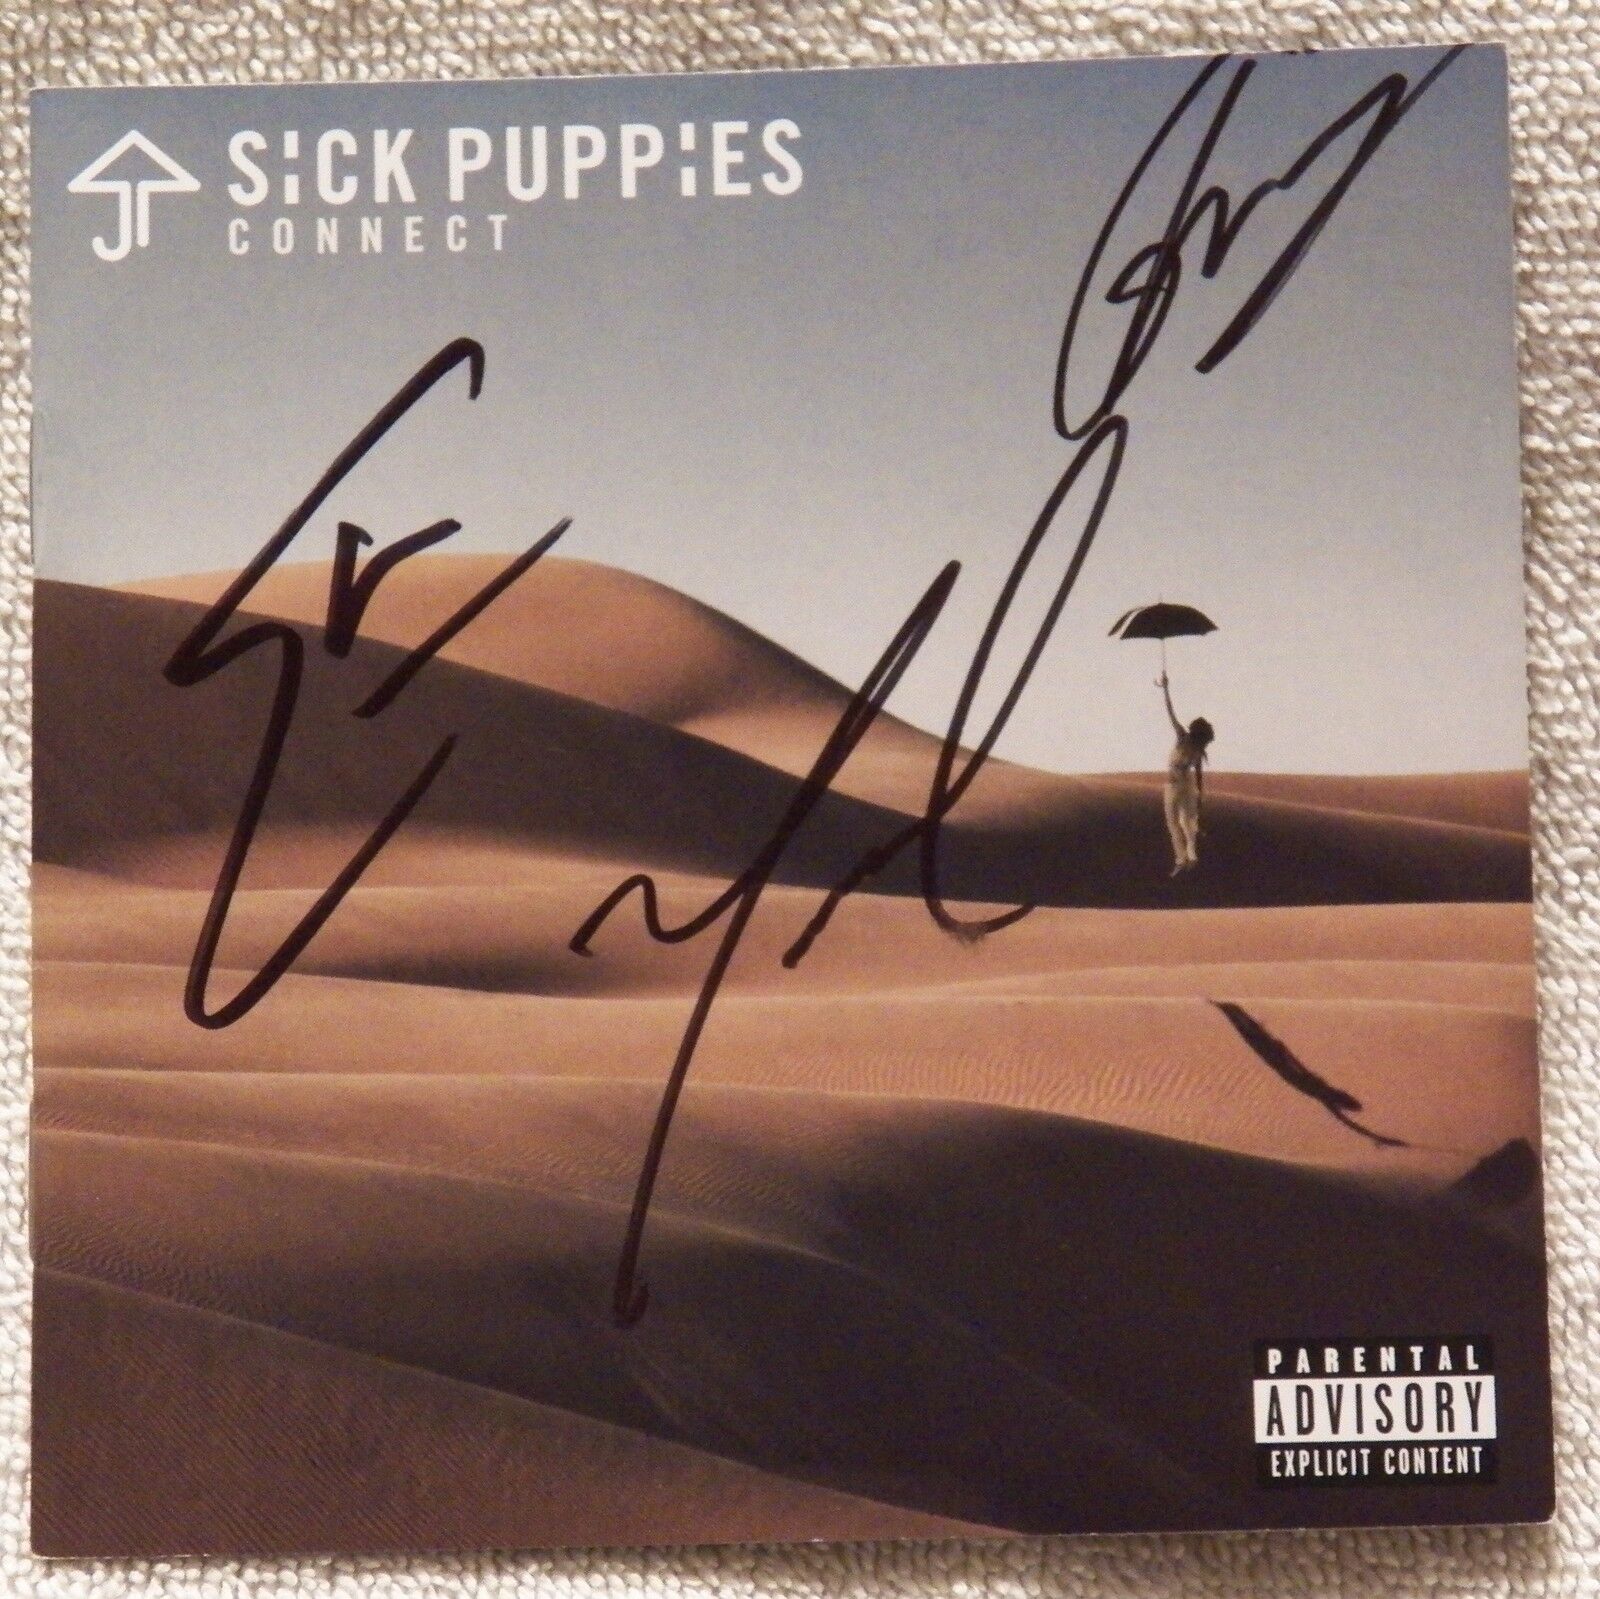 Sick Puppies Connect CD Signed by Shimon Moore Emma Anzai Mark Goodwin Auto